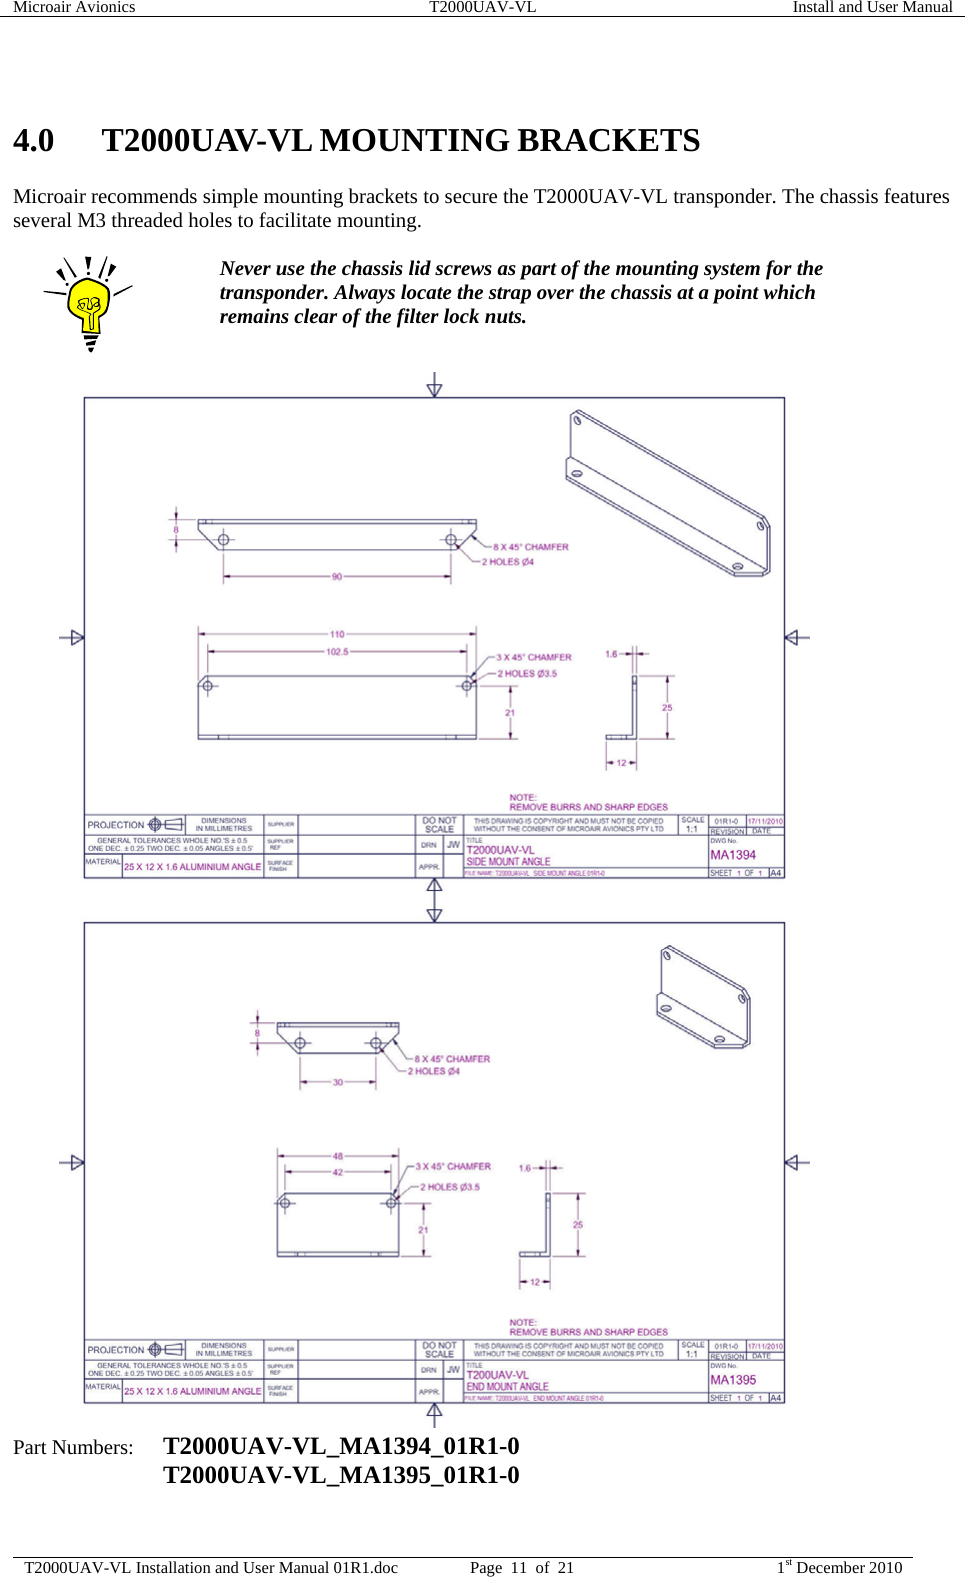 Microair Avionics  T2000UAV-VL  Install and User Manual  T2000UAV-VL Installation and User Manual 01R1.doc  Page  11  of  21  1st December 2010   4.0 T2000UAV-VL MOUNTING BRACKETS Microair recommends simple mounting brackets to secure the T2000UAV-VL transponder. The chassis features several M3 threaded holes to facilitate mounting.   Never use the chassis lid screws as part of the mounting system for the transponder. Always locate the strap over the chassis at a point which remains clear of the filter lock nuts.                                              Part Numbers:  T2000UAV-VL_MA1394_01R1-0   T2000UAV-VL_MA1395_01R1-0  